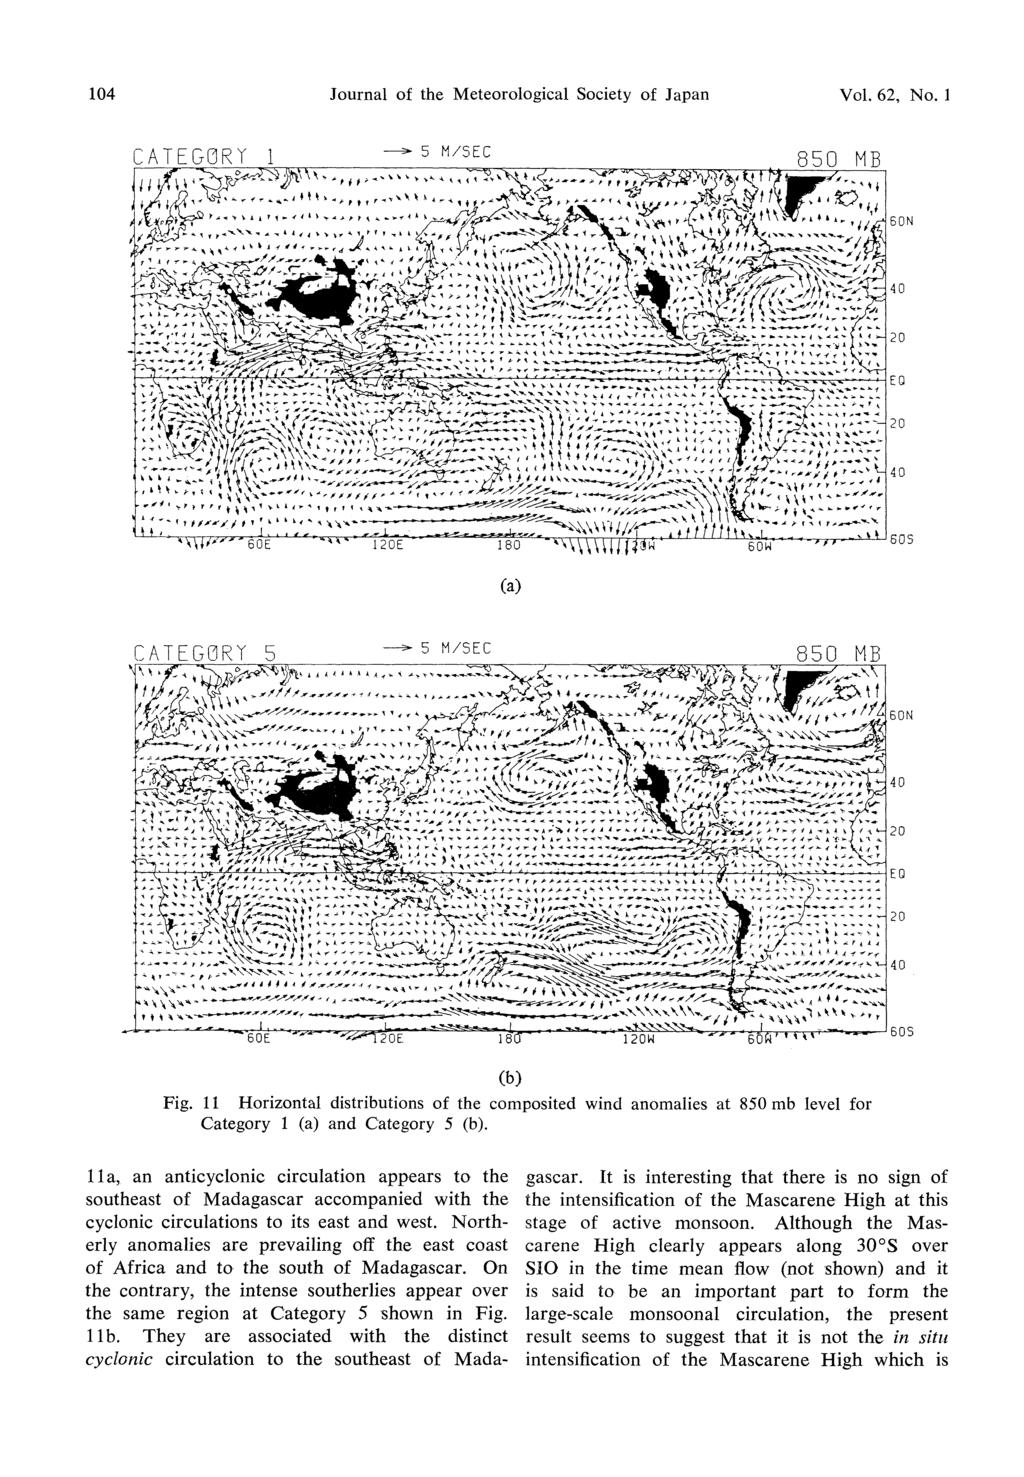 104 Journal of the Meteorological Society of Japan Vol. 62, No. 1 Fig. 11 Horizontal distributions of the composited wind anomalies at 850mb level for Category 1 (a) and Category 5 (b).